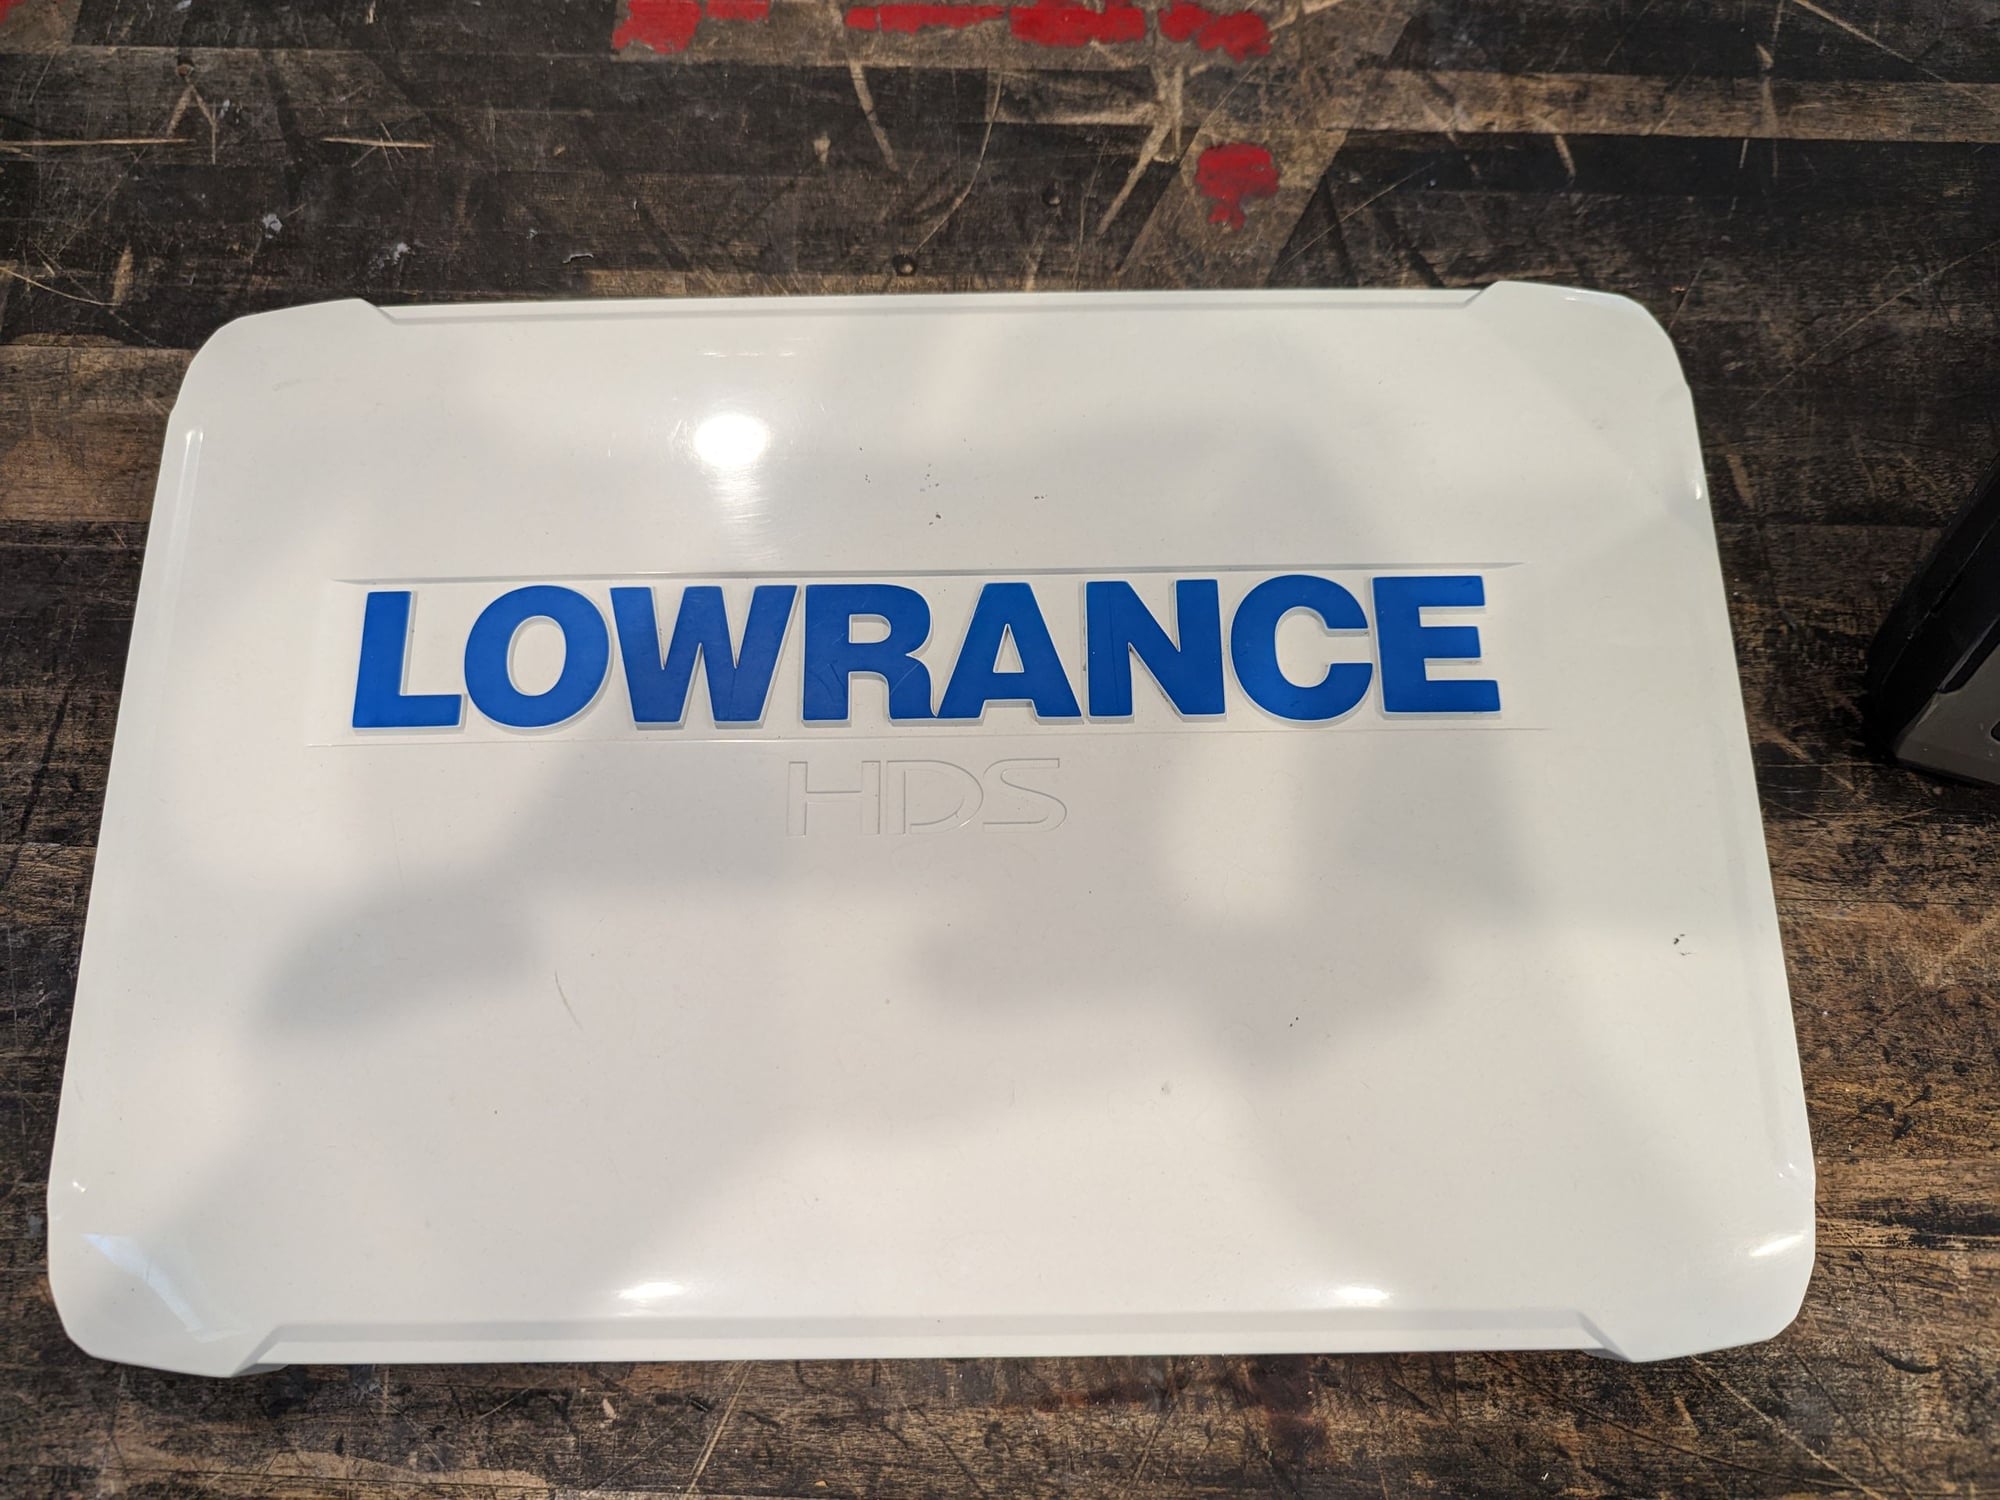 Lowrance HDS-9 Gen3 Suncover